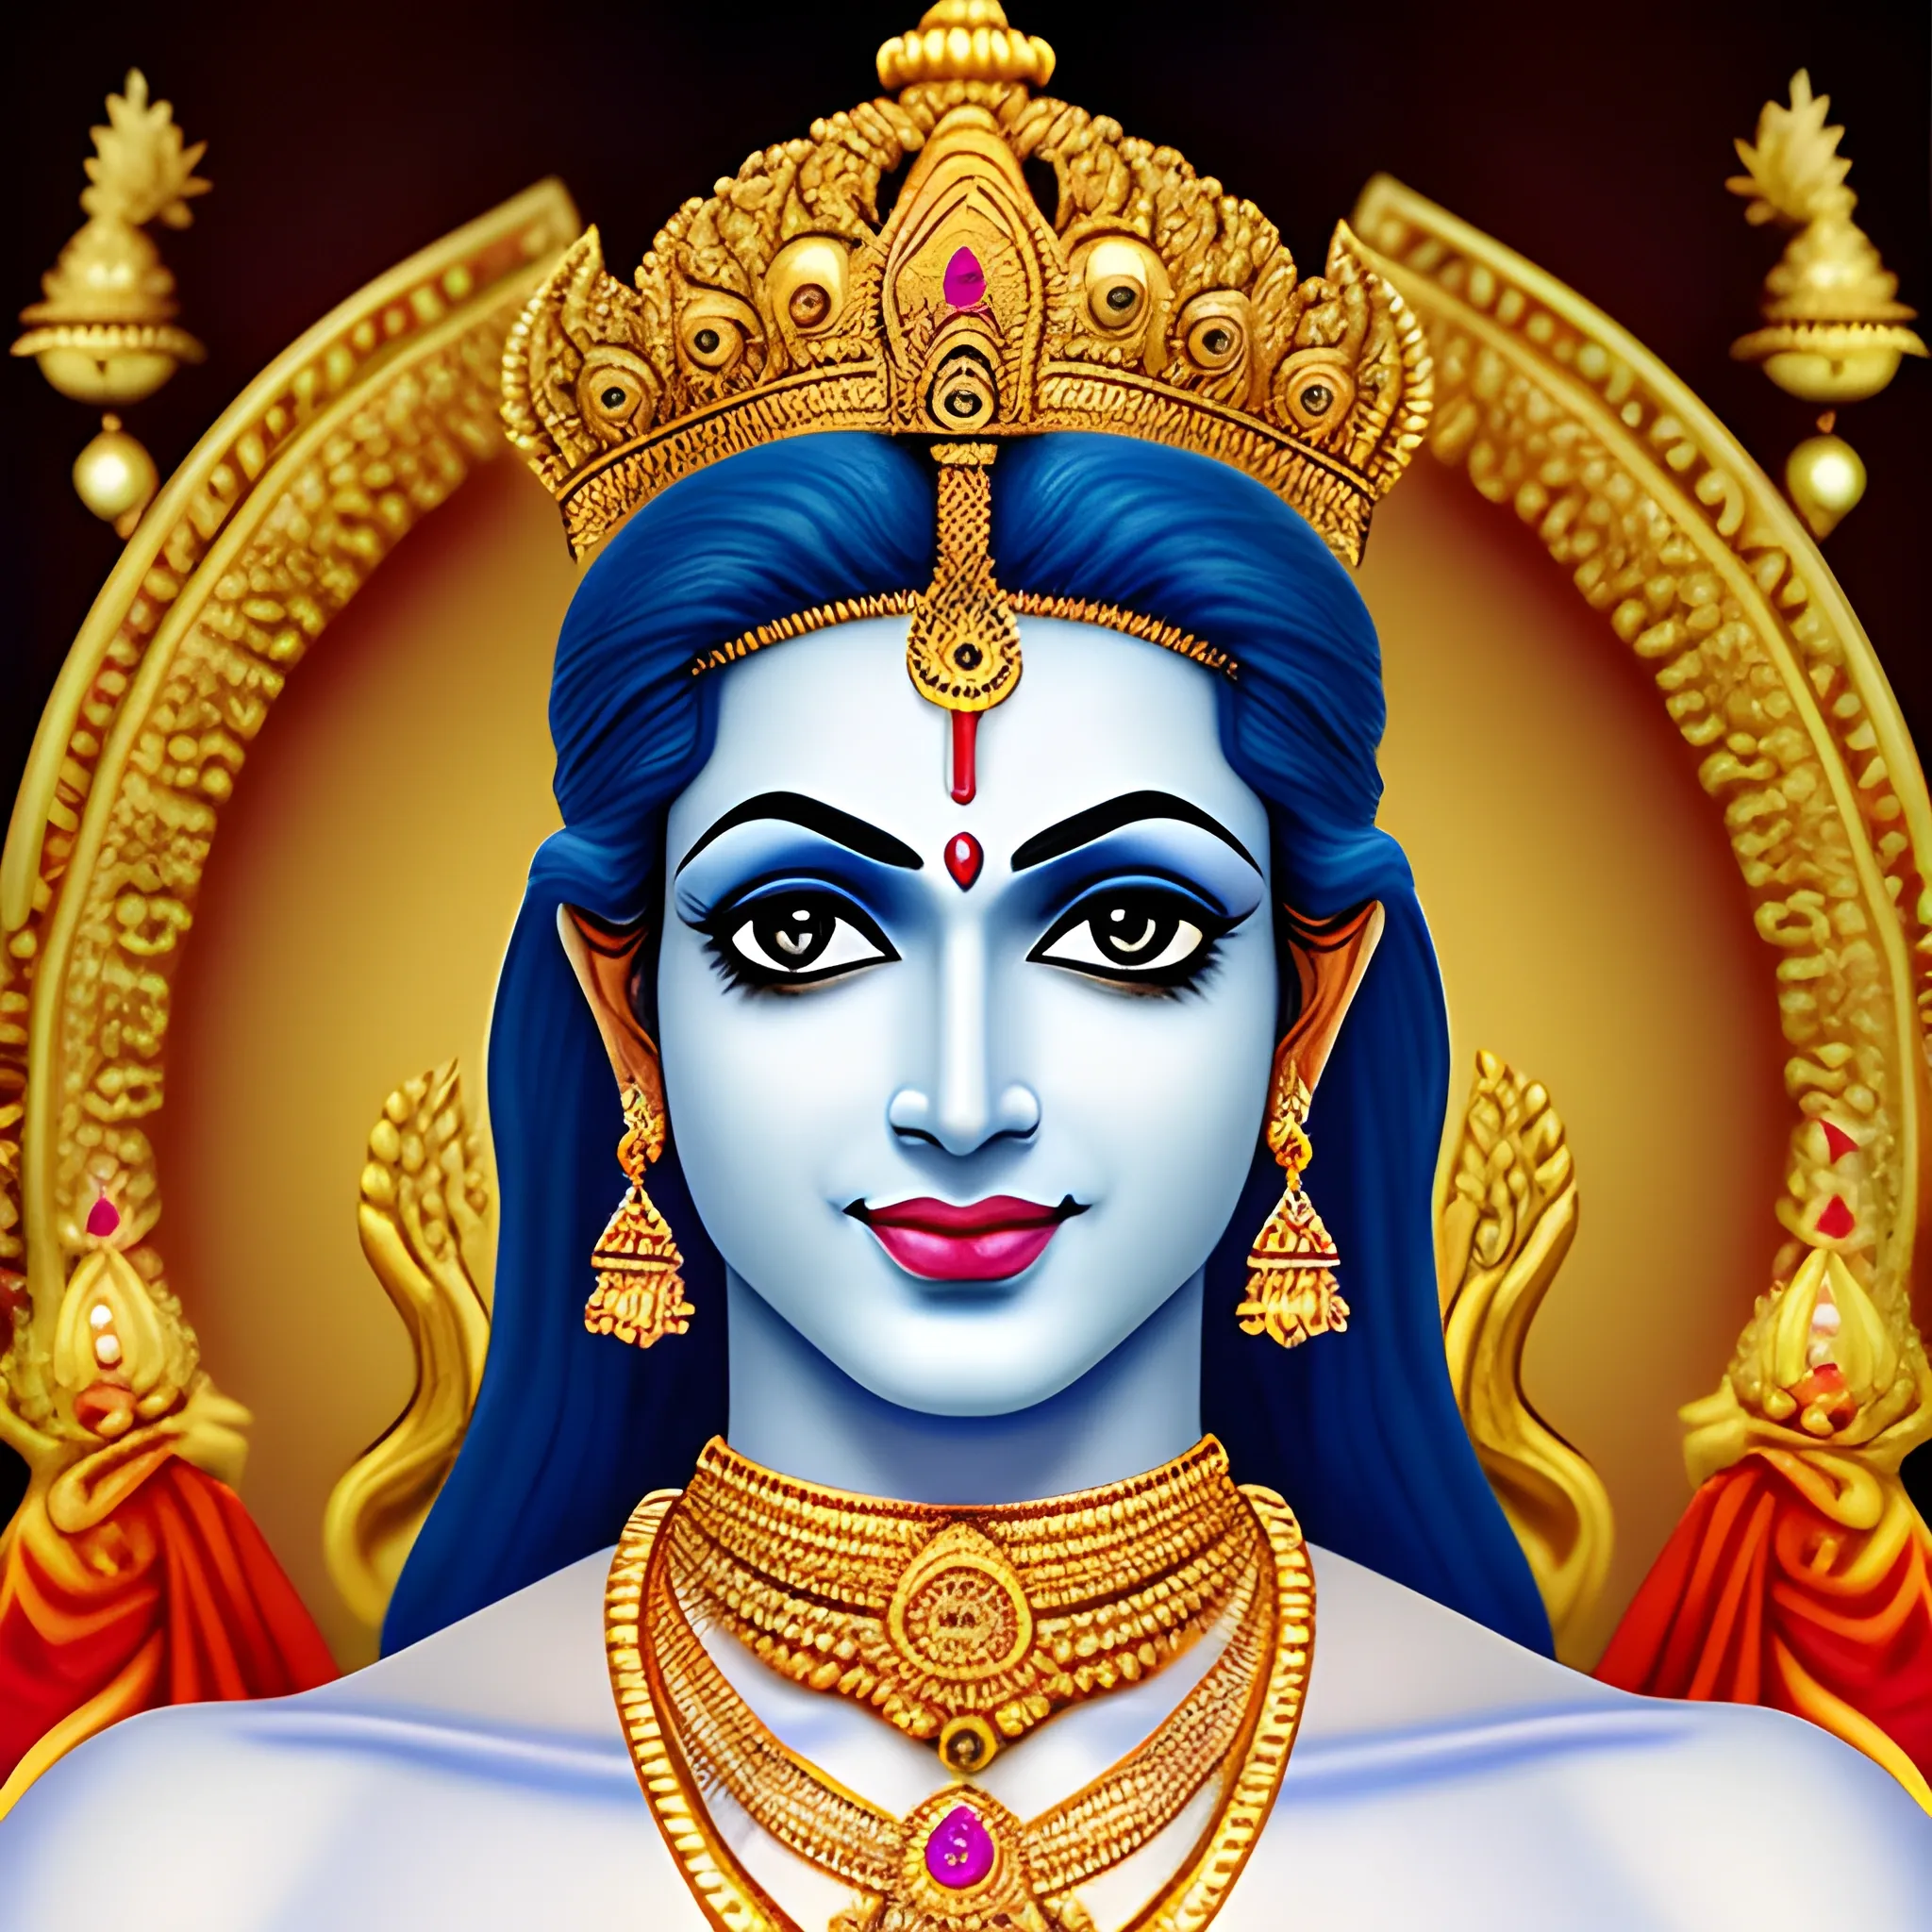 Generate an 8K image of Lord Krishna, the Hindu deity, portrayed as a toddler-like and cute figure. Depict Lord Krishna as a king adorned with majestic jewelry. Ensure that Lord Krishna's facial features reflect a playful and endearing expression. The image should radiate warmth, kindness, and divinity. Pay attention to intricate details of the jewelry, including crown, necklaces, bracelets, and earrings, and realistic, body, hole body blue, making them look regal and captivating. The final result should be a high-resolution, adorable image of Lord Krishna, reminiscent of his divine presence.